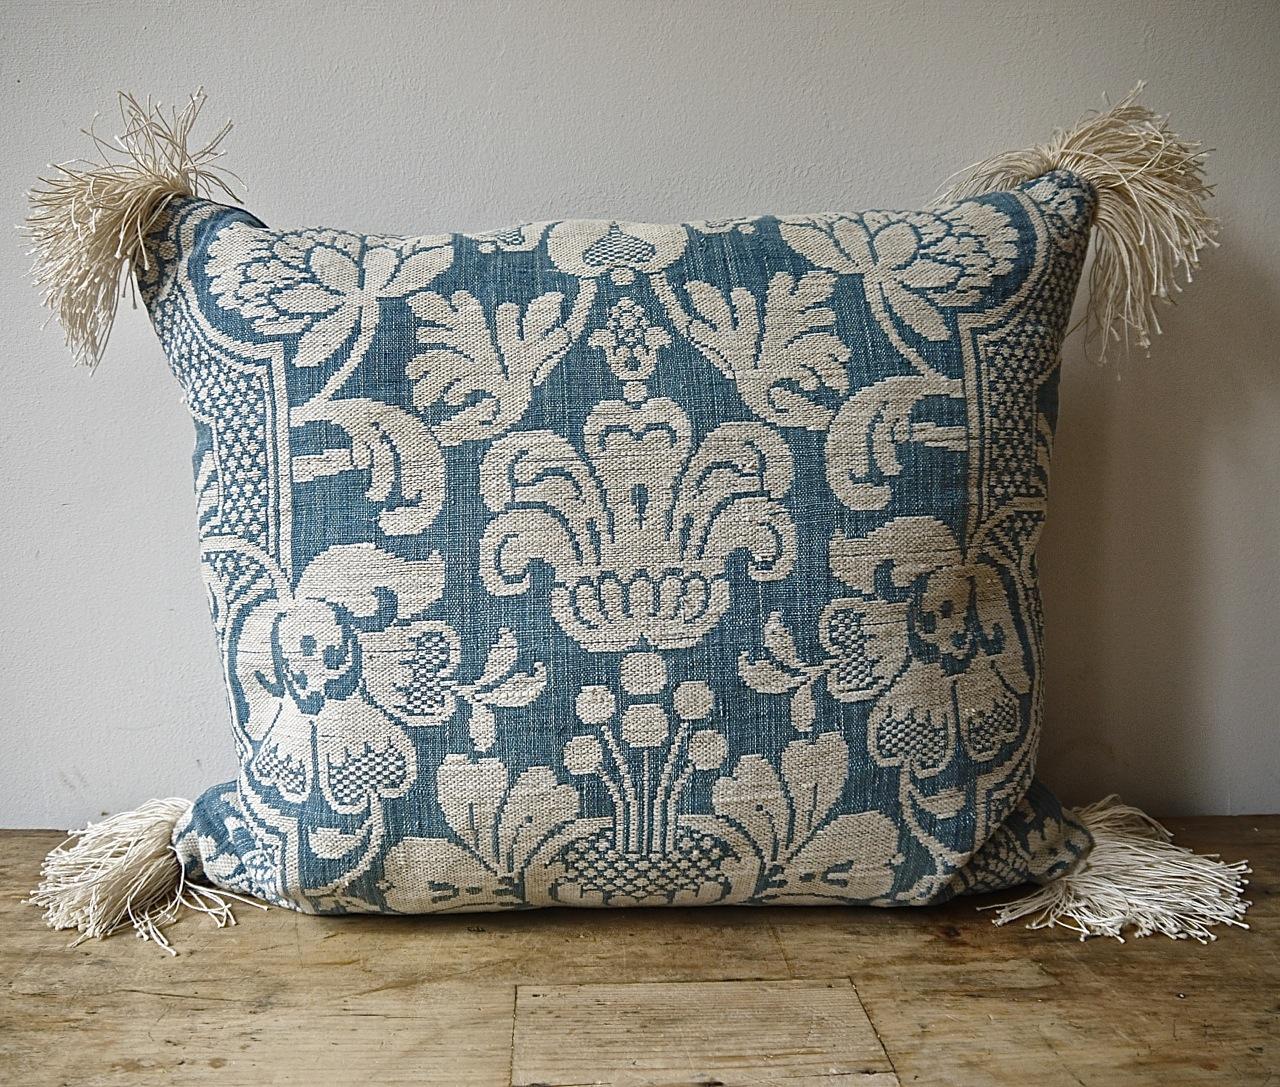 French, circa 1760s woven blue and white linen and cotton cushion. Wonderful texture and contrast of weaves and yarns. Antique French linen fringing at the corners and backed in a dyed 19th century, French linen. Slip-stitched closed with a duck